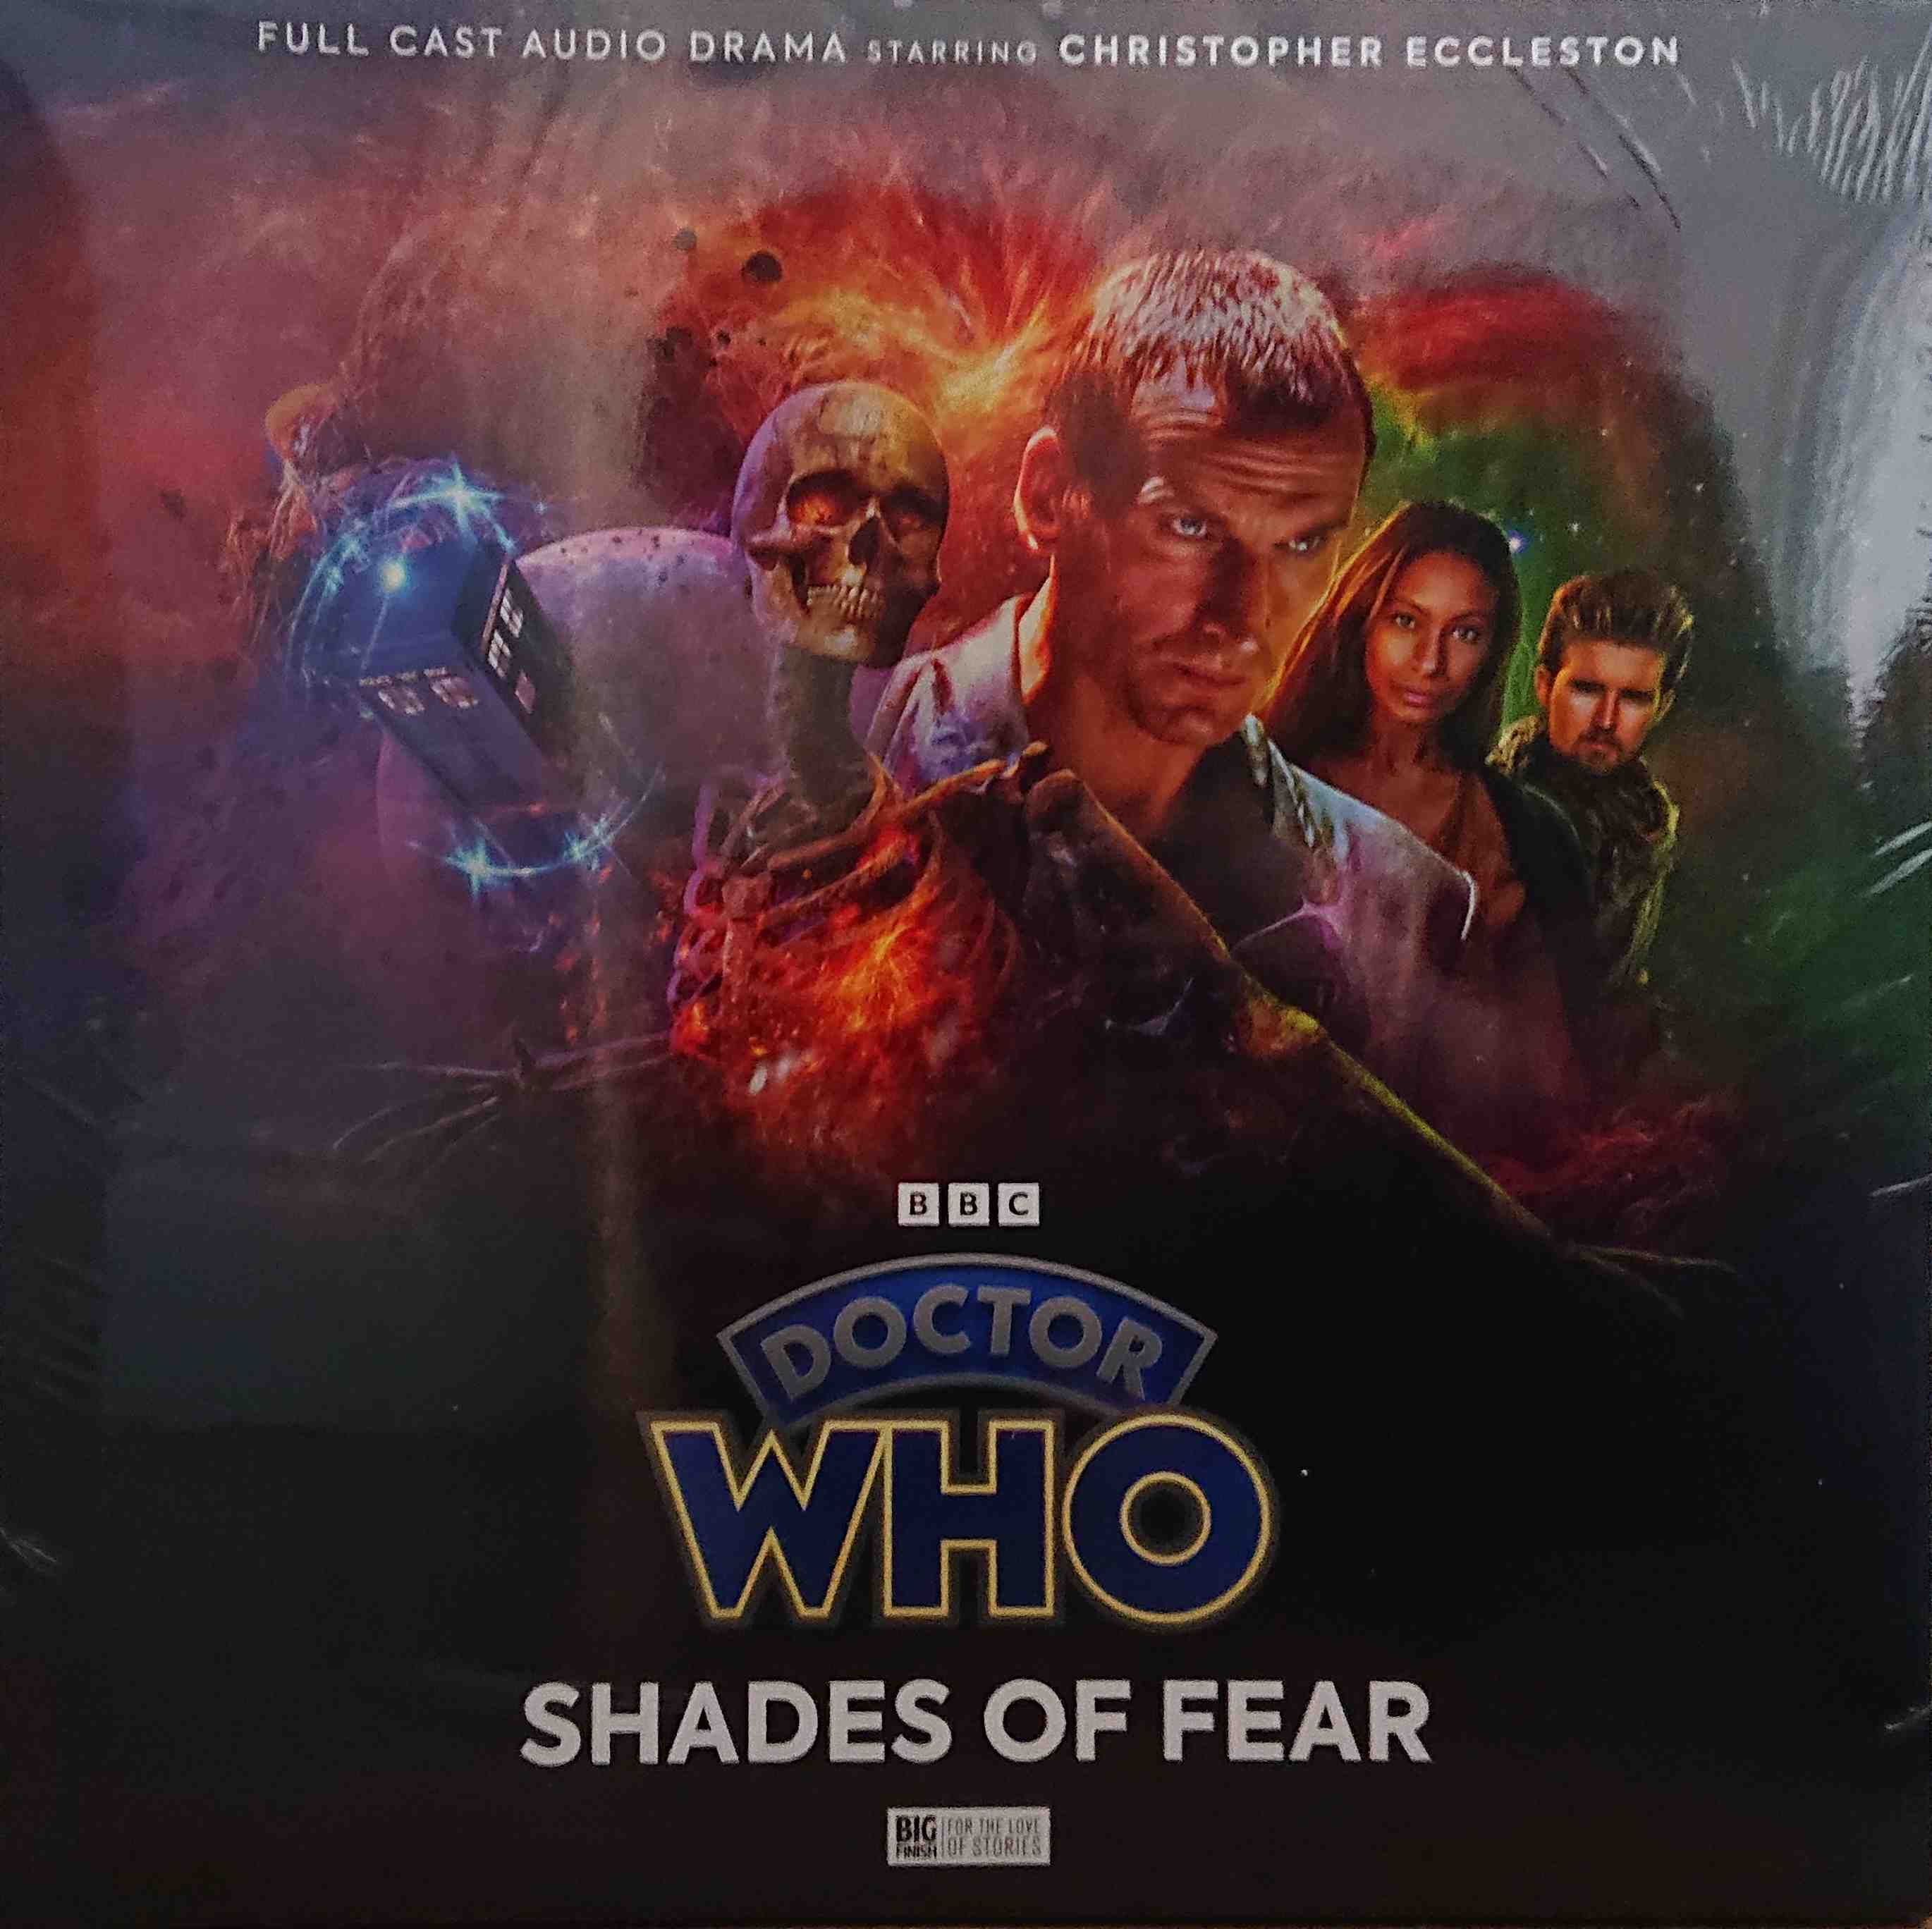 Picture of BFPDW9TH08V Doctor Who - The Ninth Doctor Adventures 2.4: Shades of fear by artist Lizzie Hopley / James Kettle / Roy Gill from the BBC records and Tapes library